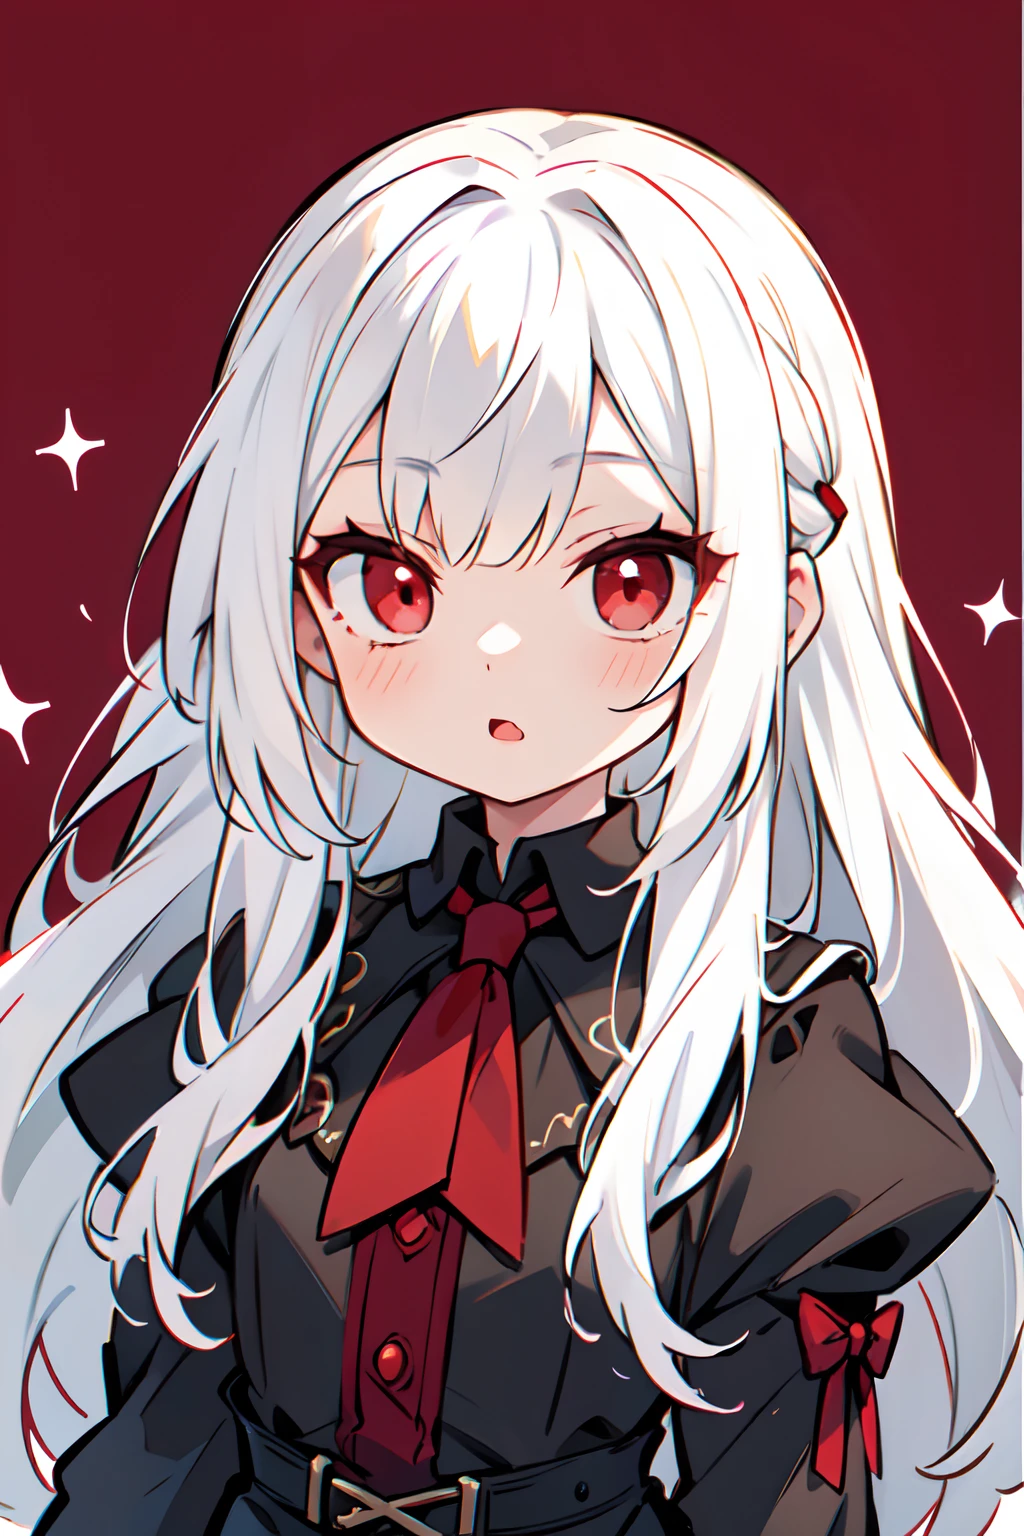 vampire kid, young, cute, young vampire , white hair long hair, red eyes, aloof expression, portrait